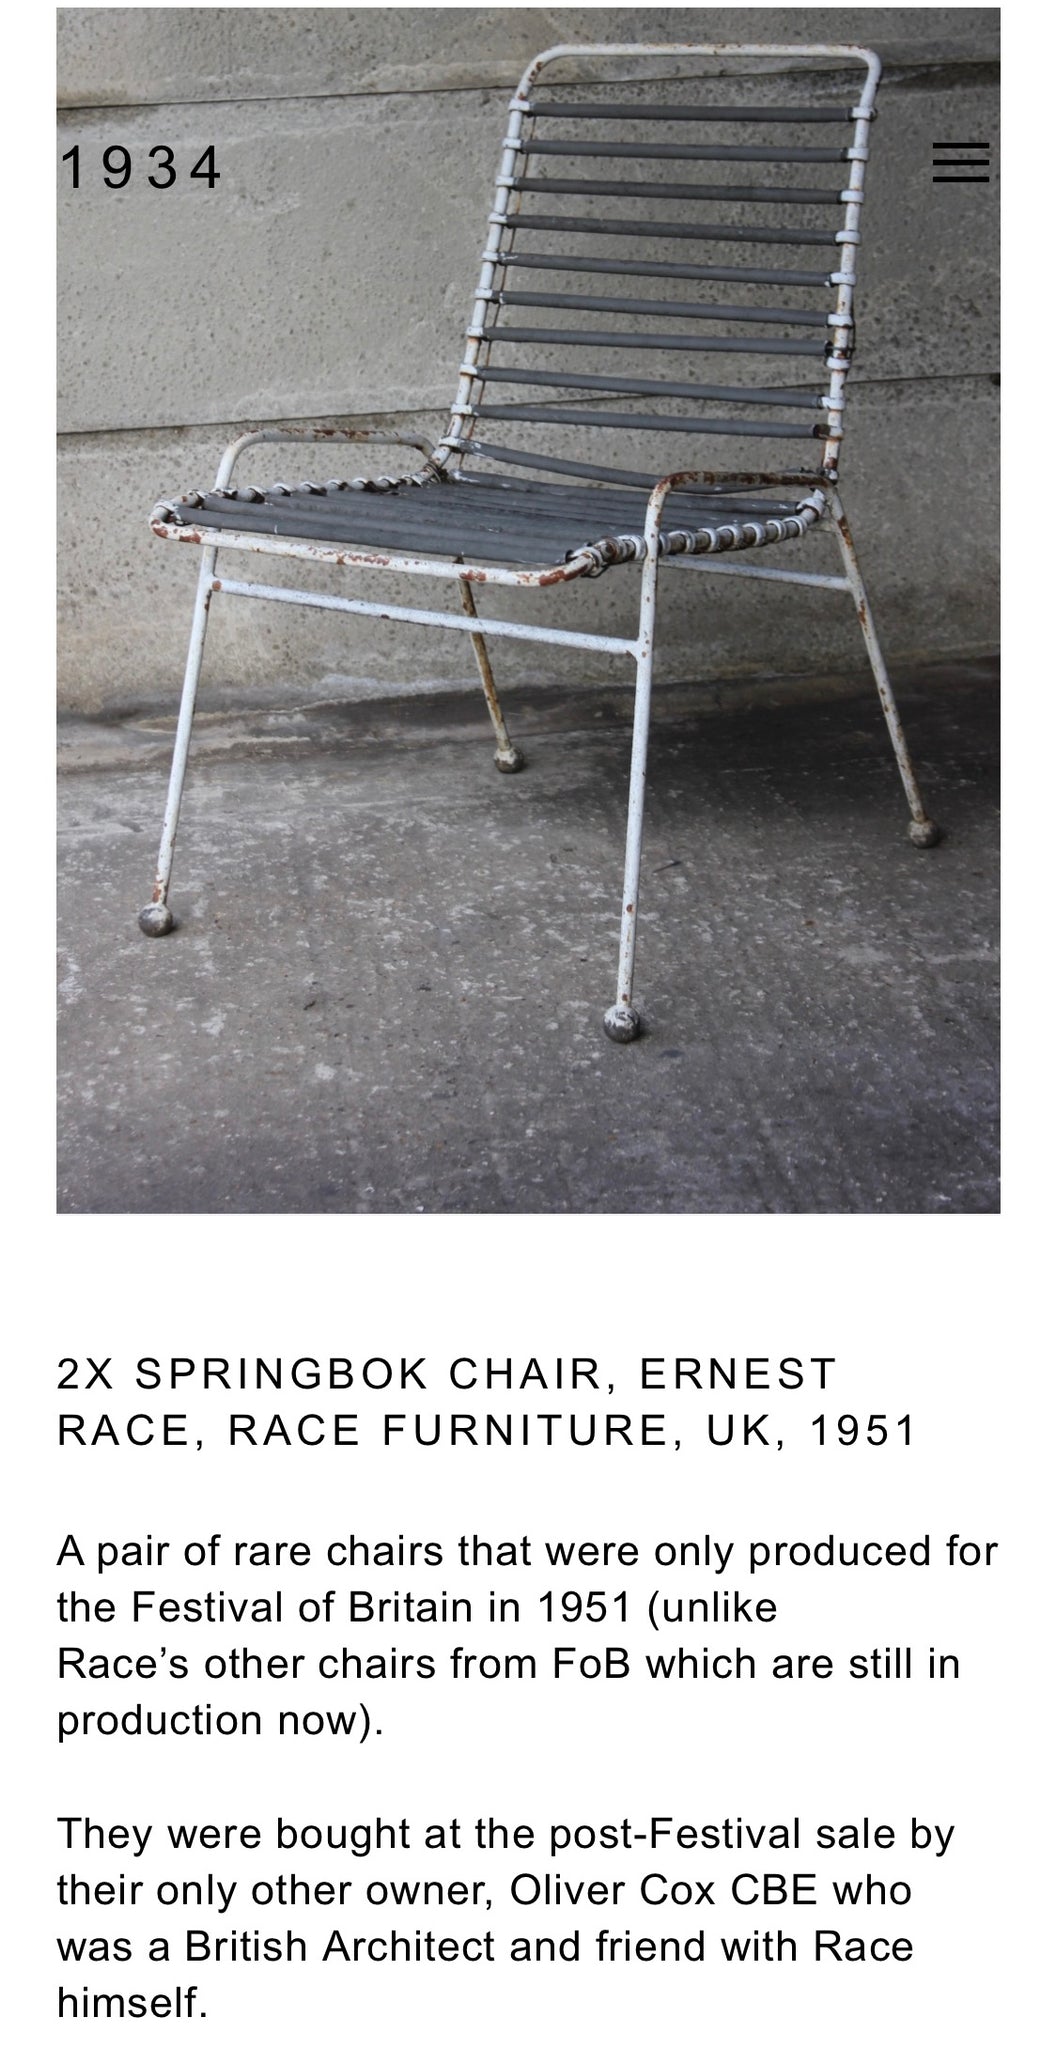 A Set of 10 RARE Vintage Chairs in the style of Springbok